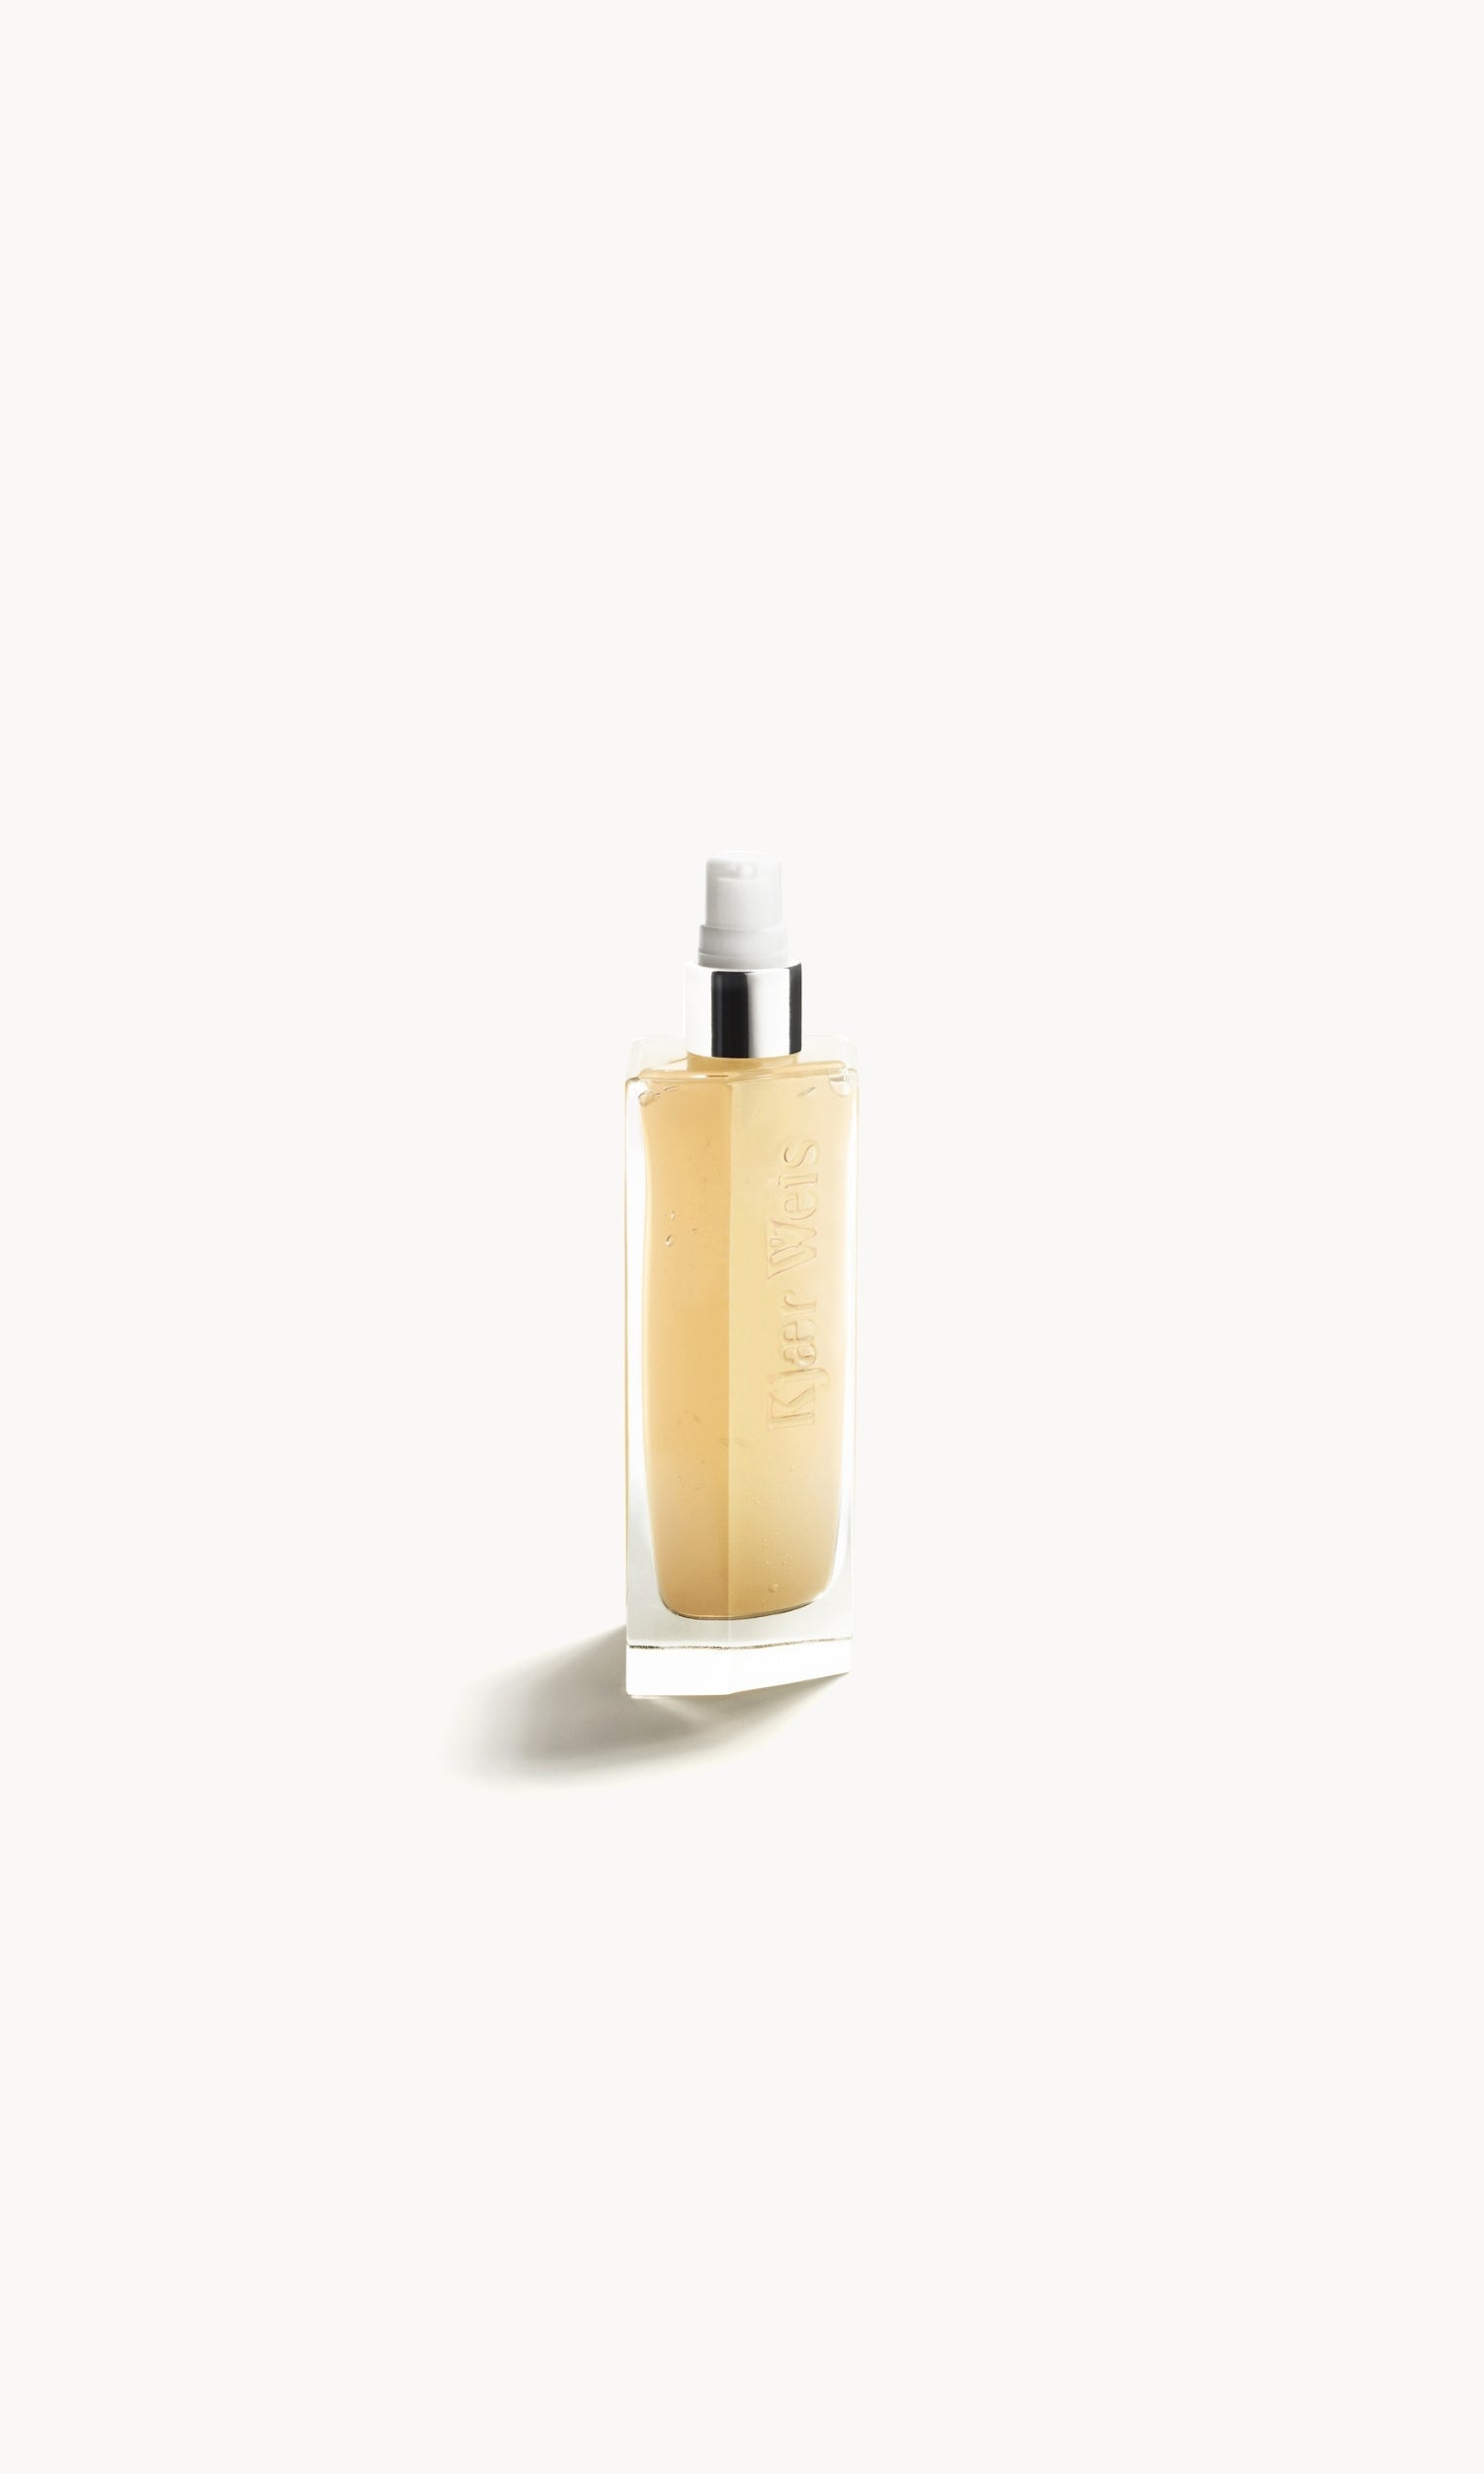 Kjaer Weis cleanser in a clear bottle with the lid removed, showing a white and silver pump